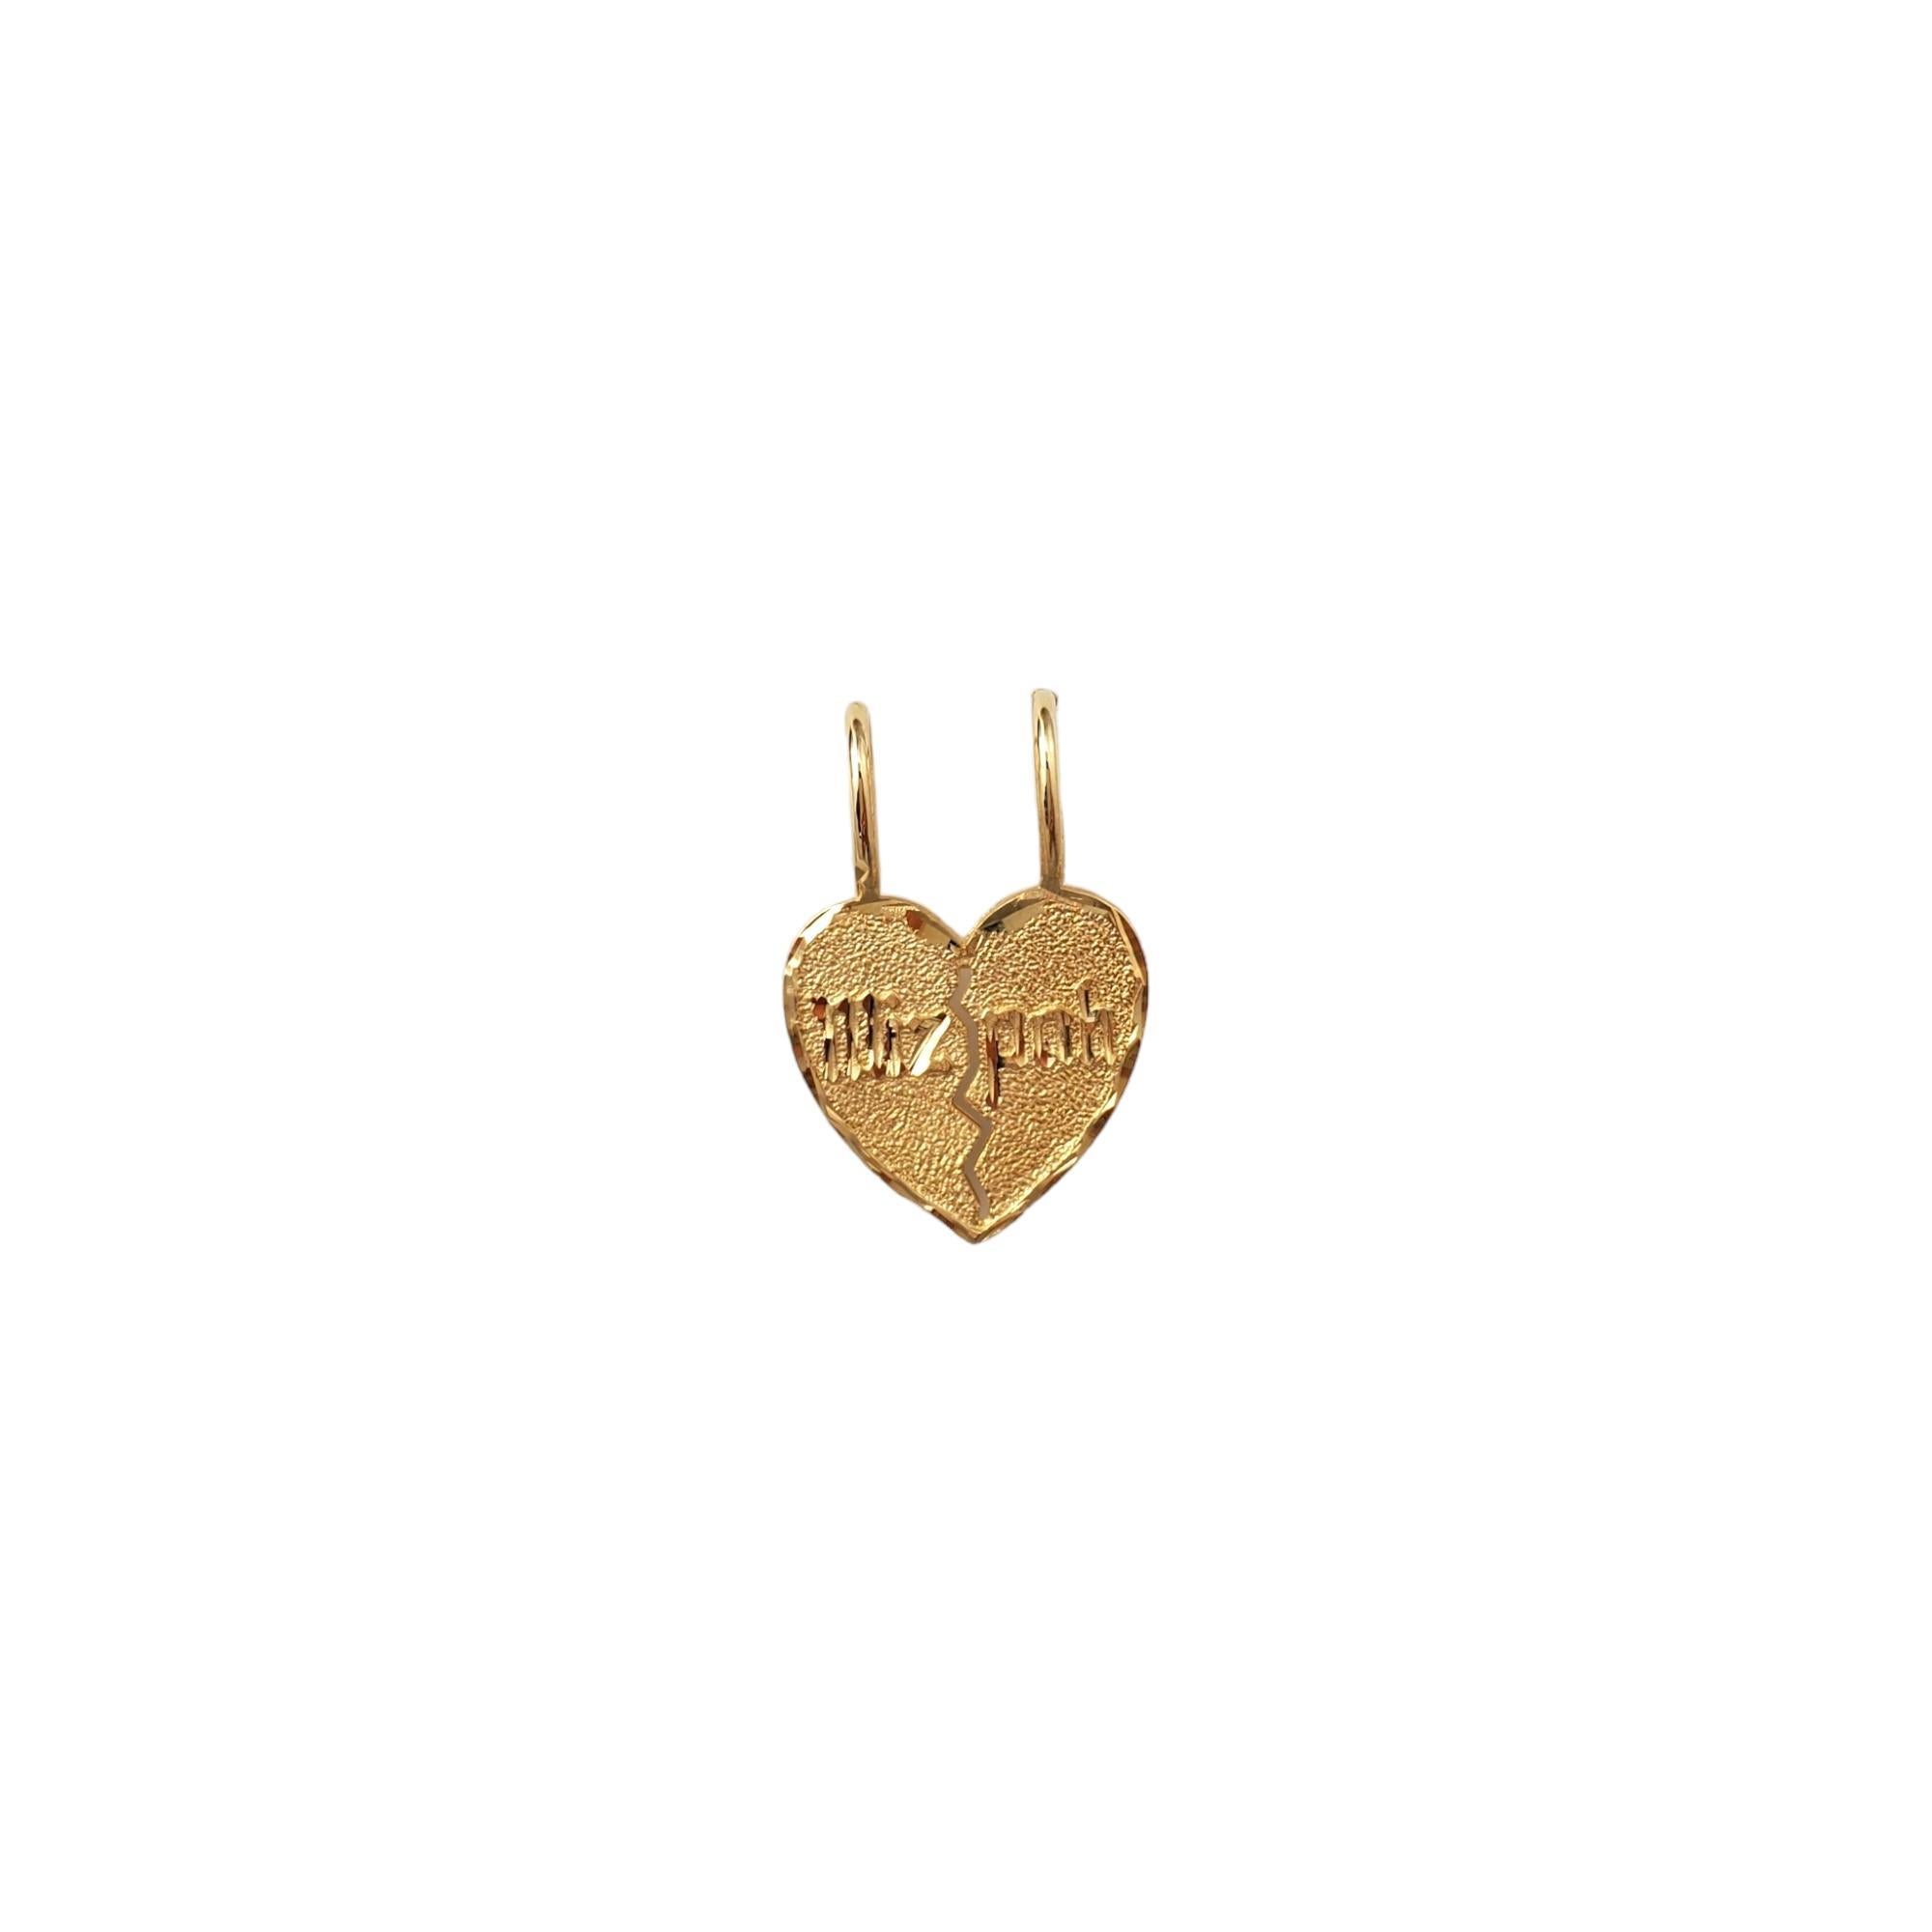 14K Yellow Gold Mizpah Heart Charm- 

Break this beautiful Mizpah charm in half and gift the other half to the person you care about! 

Back of double heart reads: The Lord watch between me and thee when we are absent one from another

Size: 20.63mm